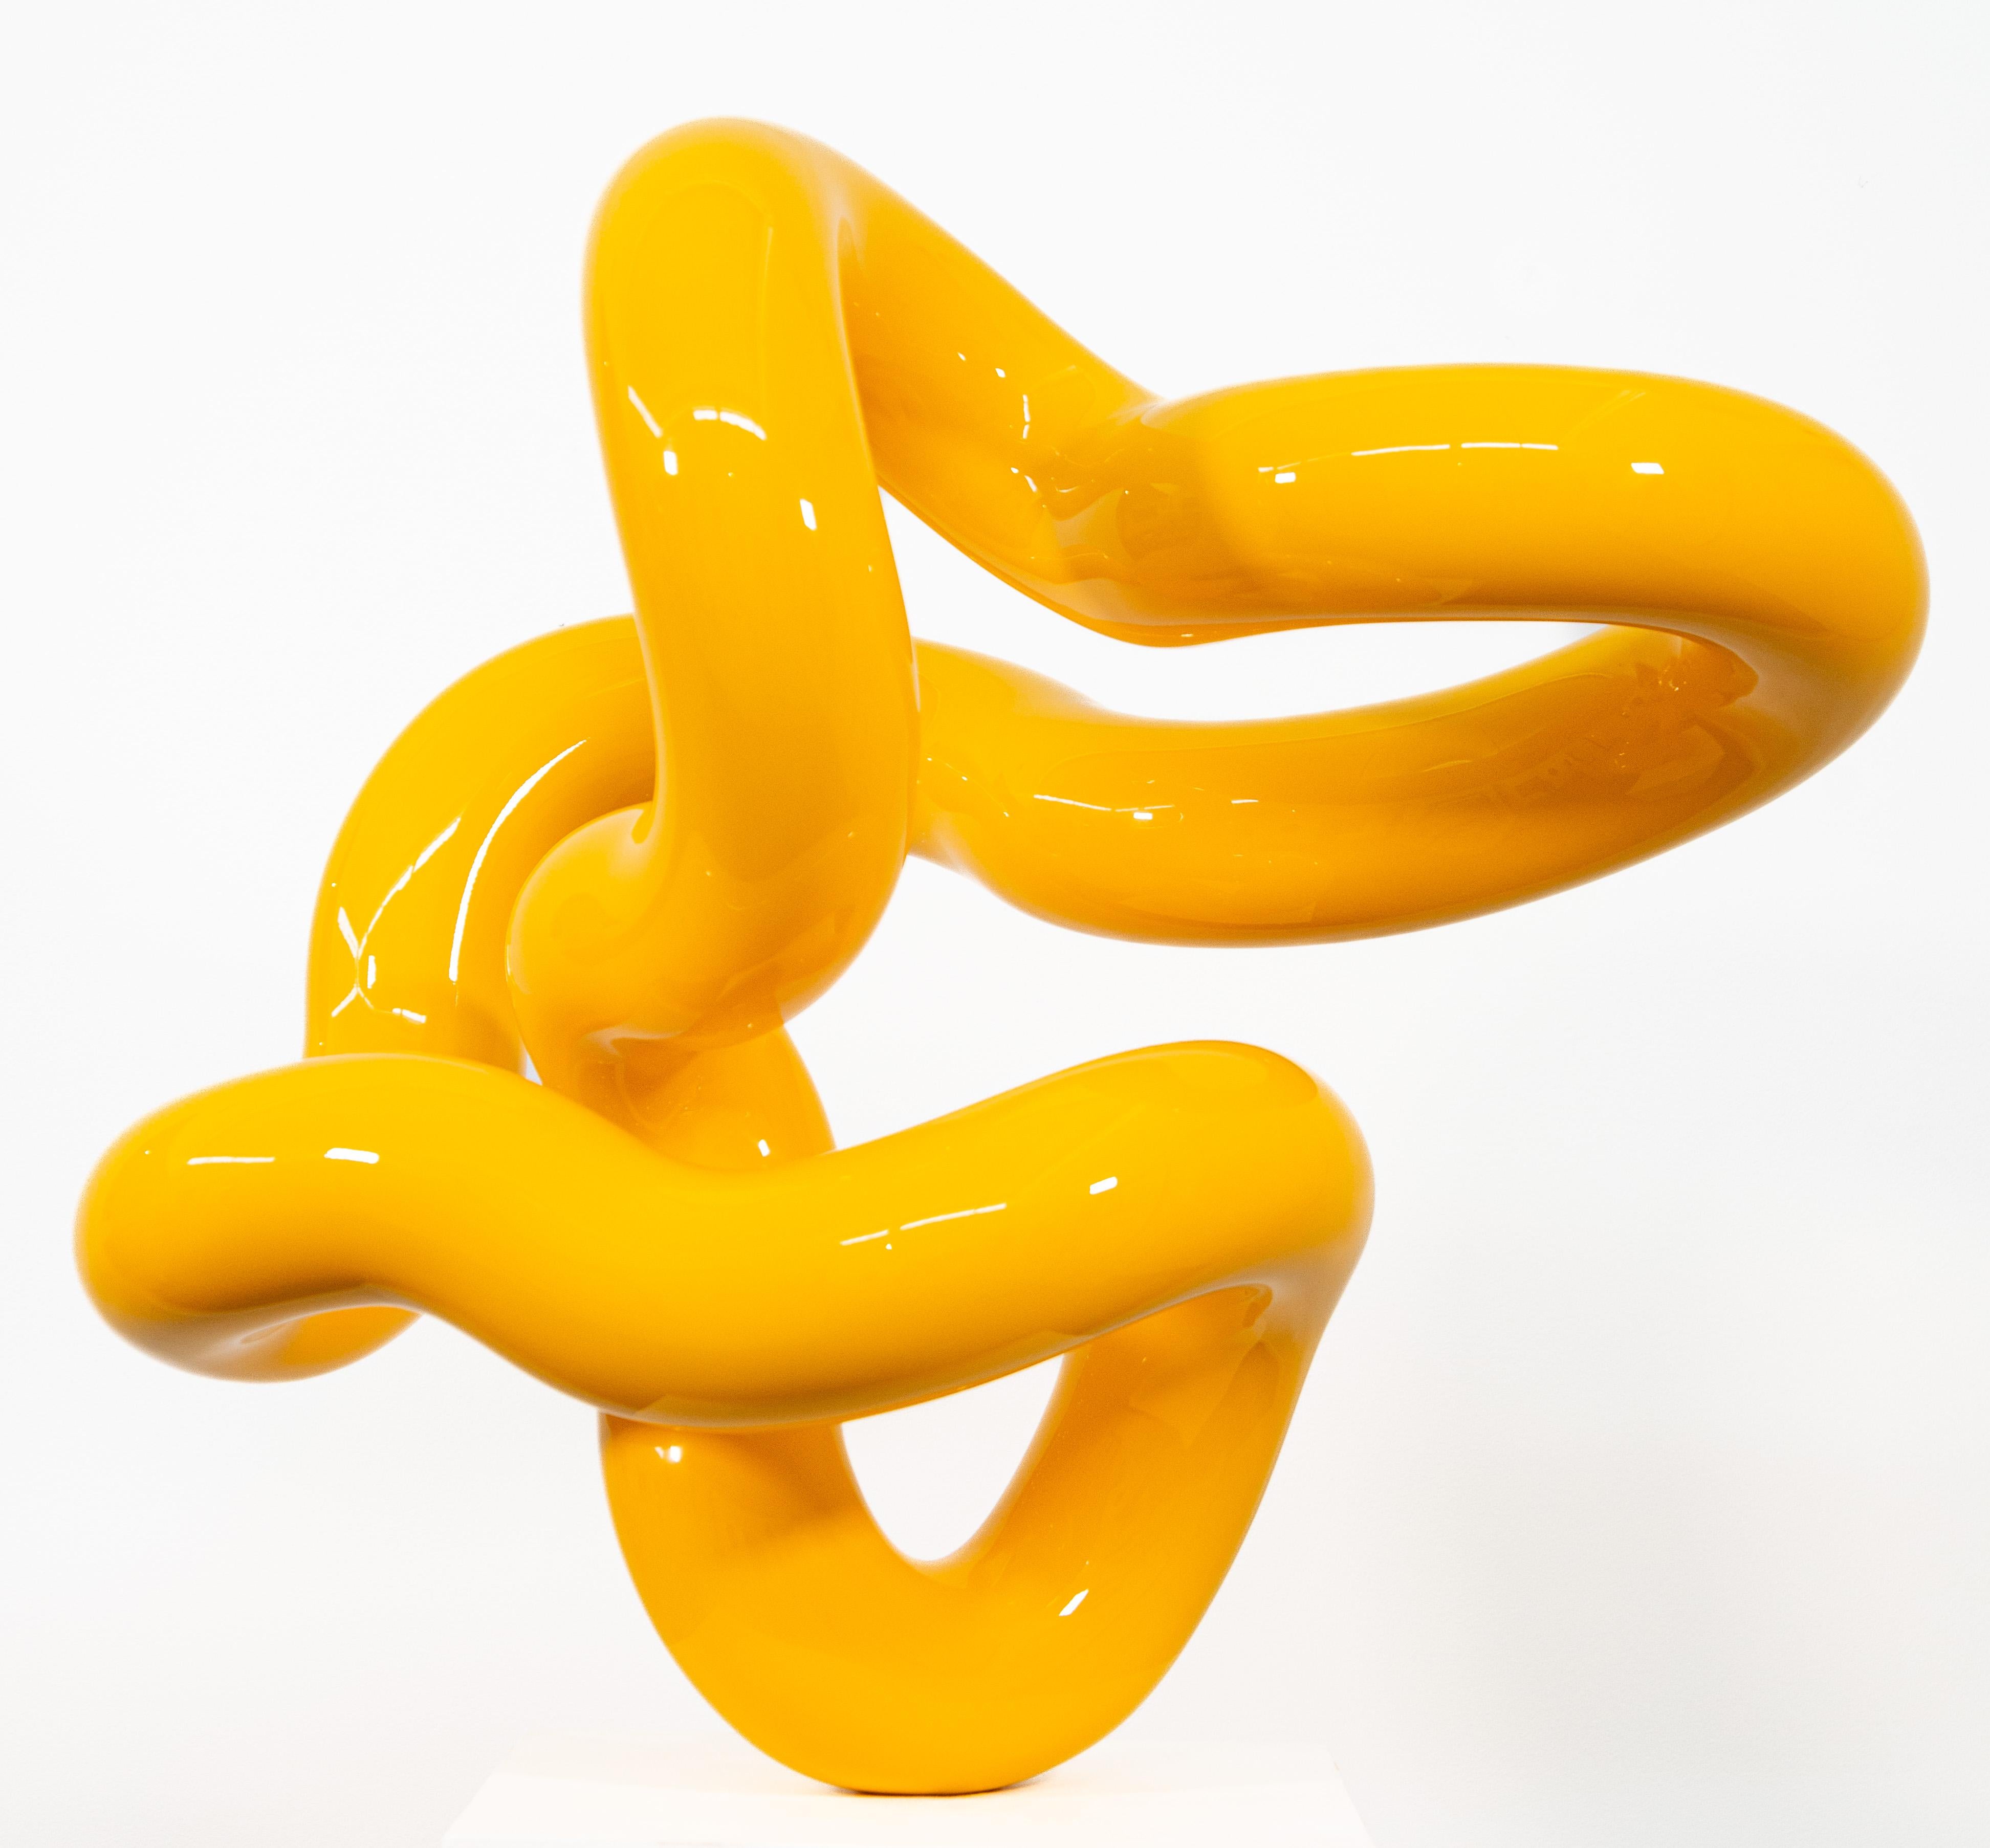 Alexander Caldwell Abstract Sculpture - Yellow Circuit - polished, abstract, painted, stainless steel sculpture